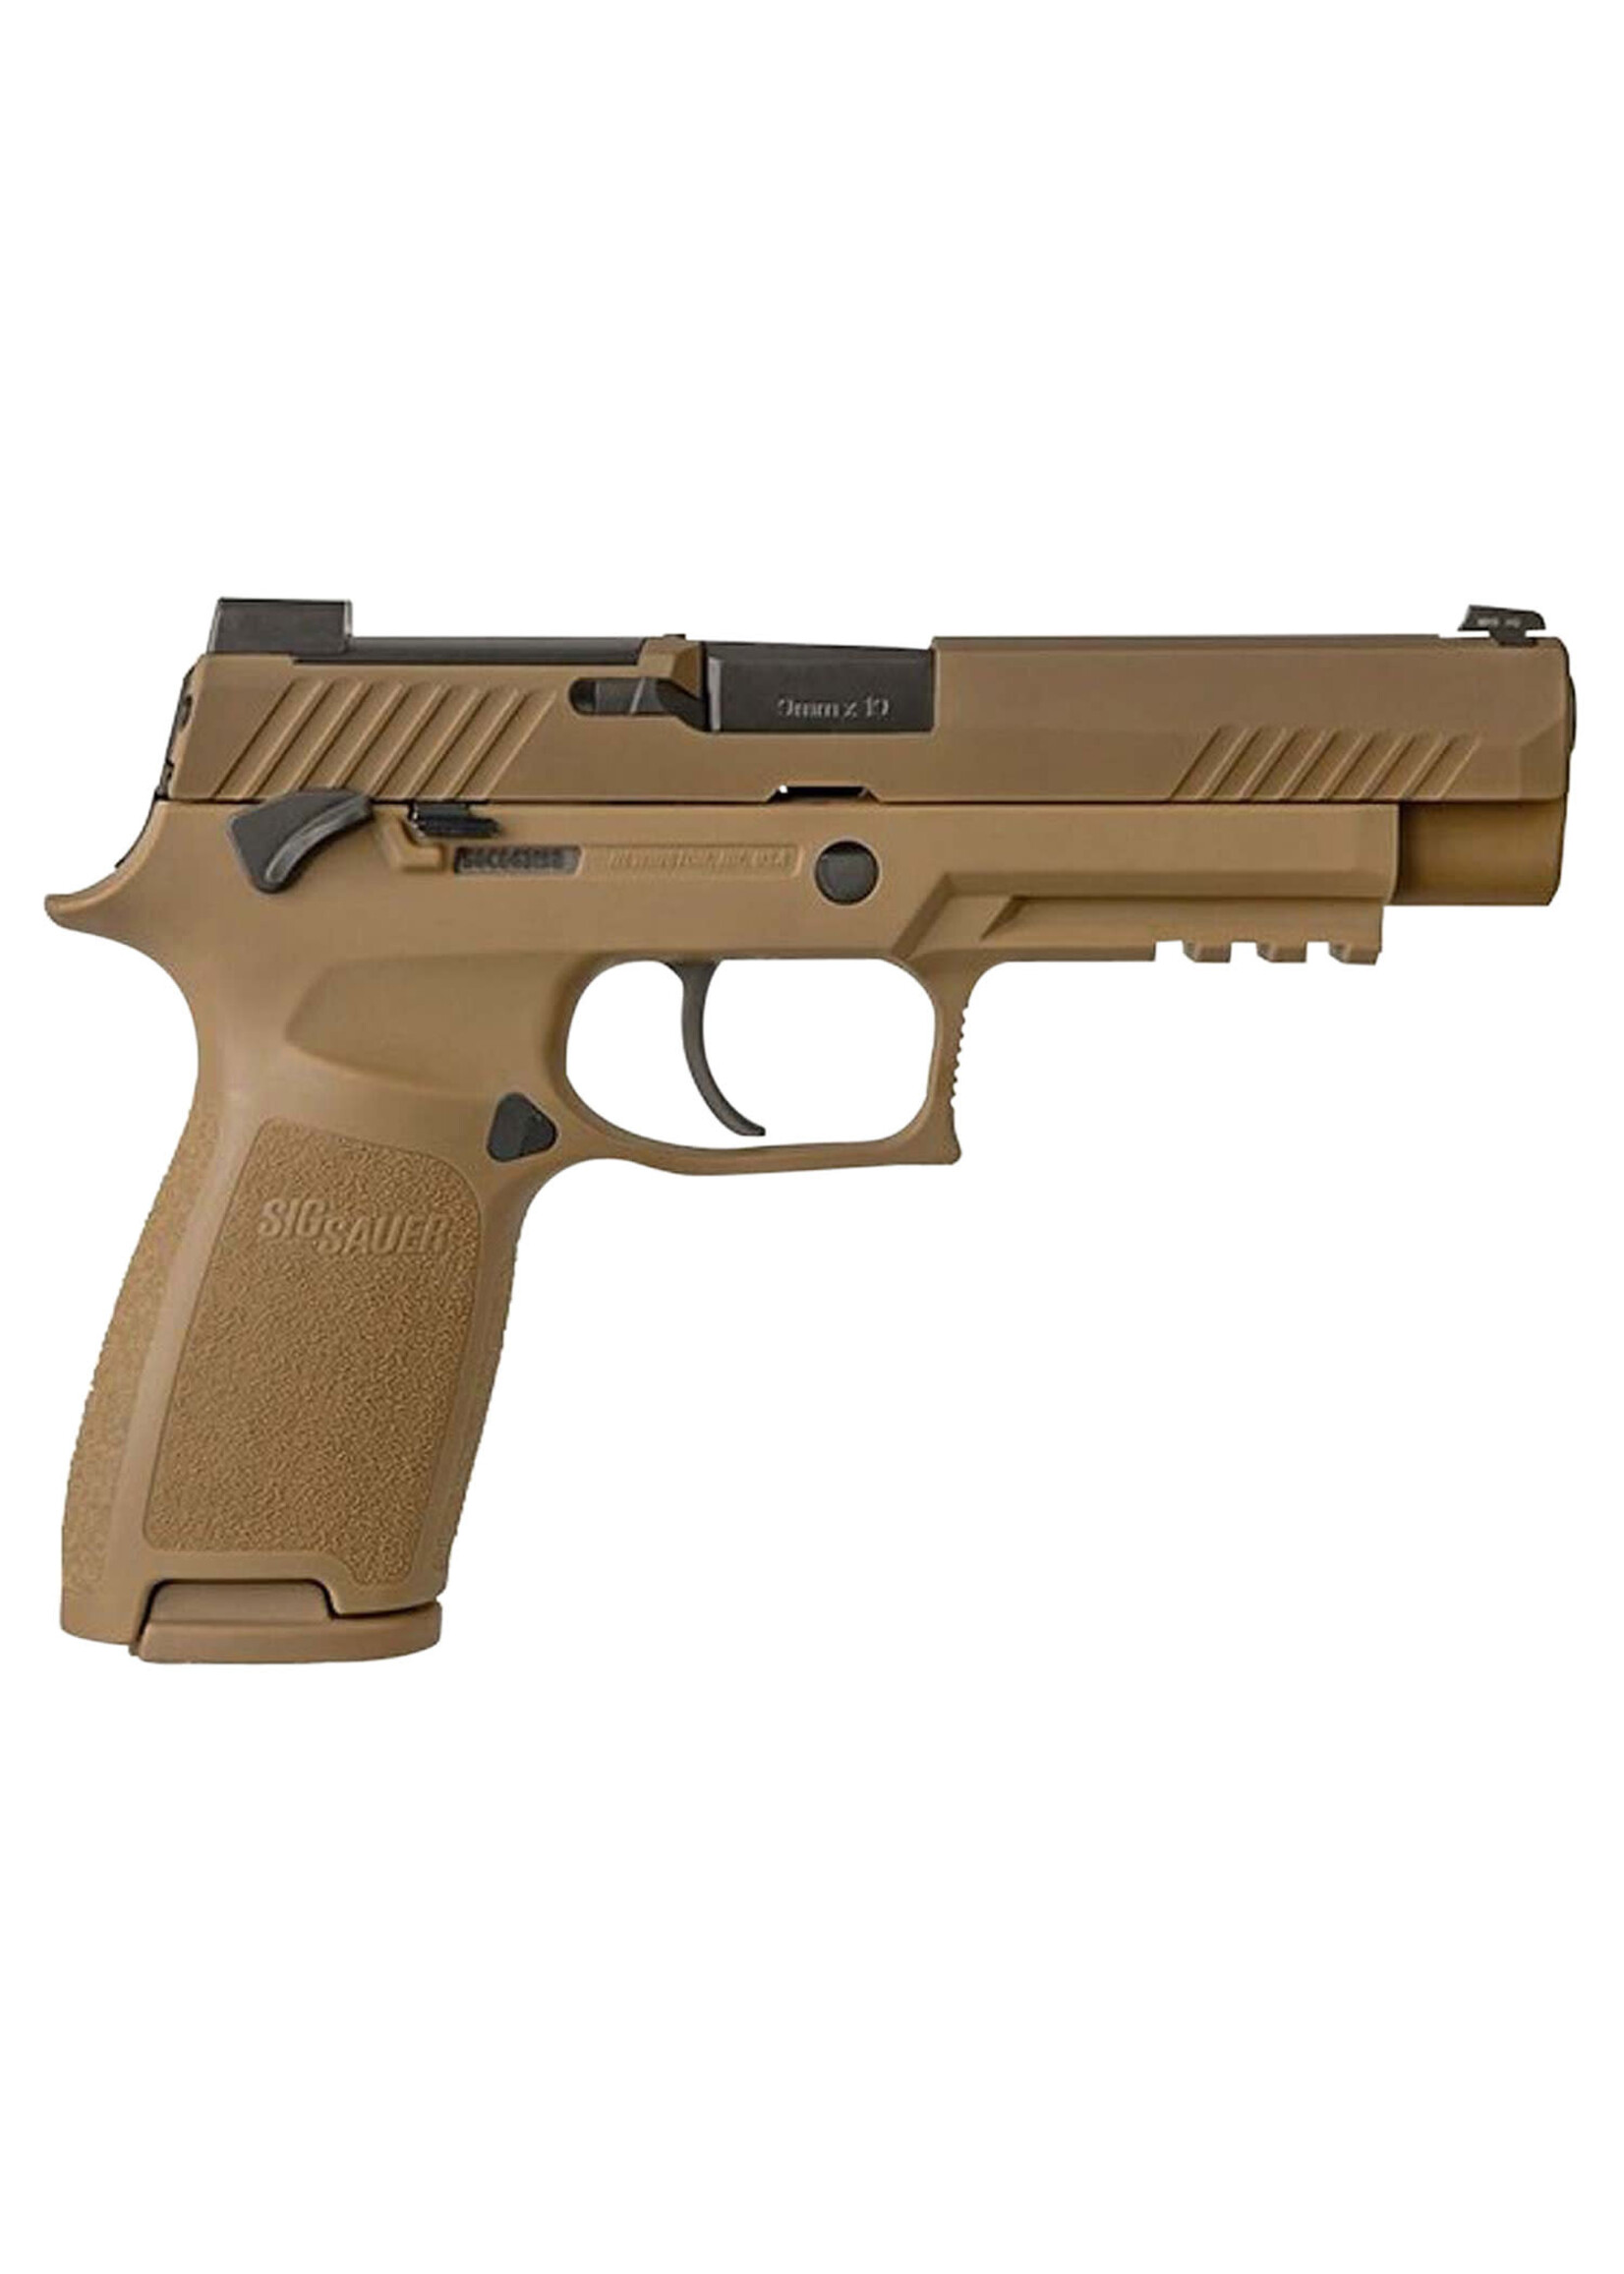 Sig Sauer Sig Sauer 320F9M17MS P320 M17 9mm Luger Caliber with 4.70" Barrel, 17+1 or 21+1 Capacity, Overall Coyote PVD Finish Stainless Steel, Picatinny Rail Frame, Serrated Slide, Polymer Grip & Manual Safety